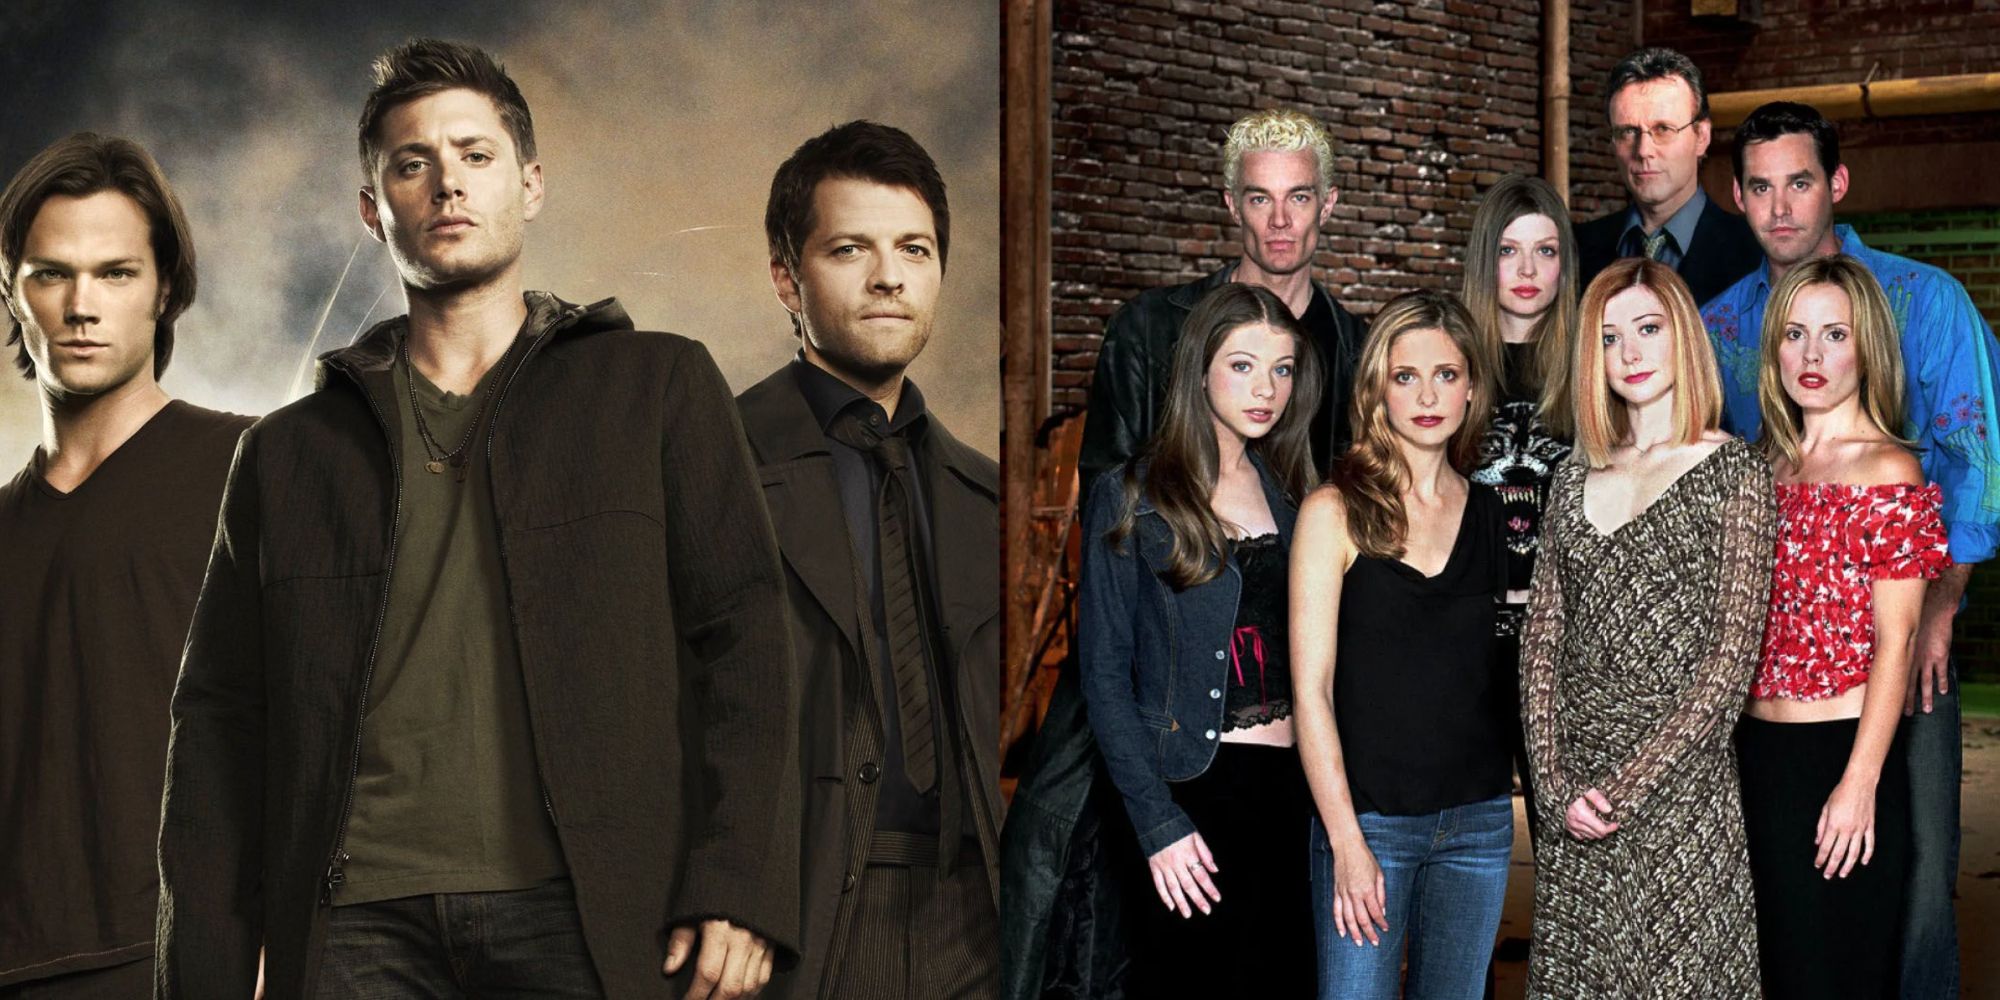 The cast of Supernatural and the cast of Buffy the Vampire Slayer